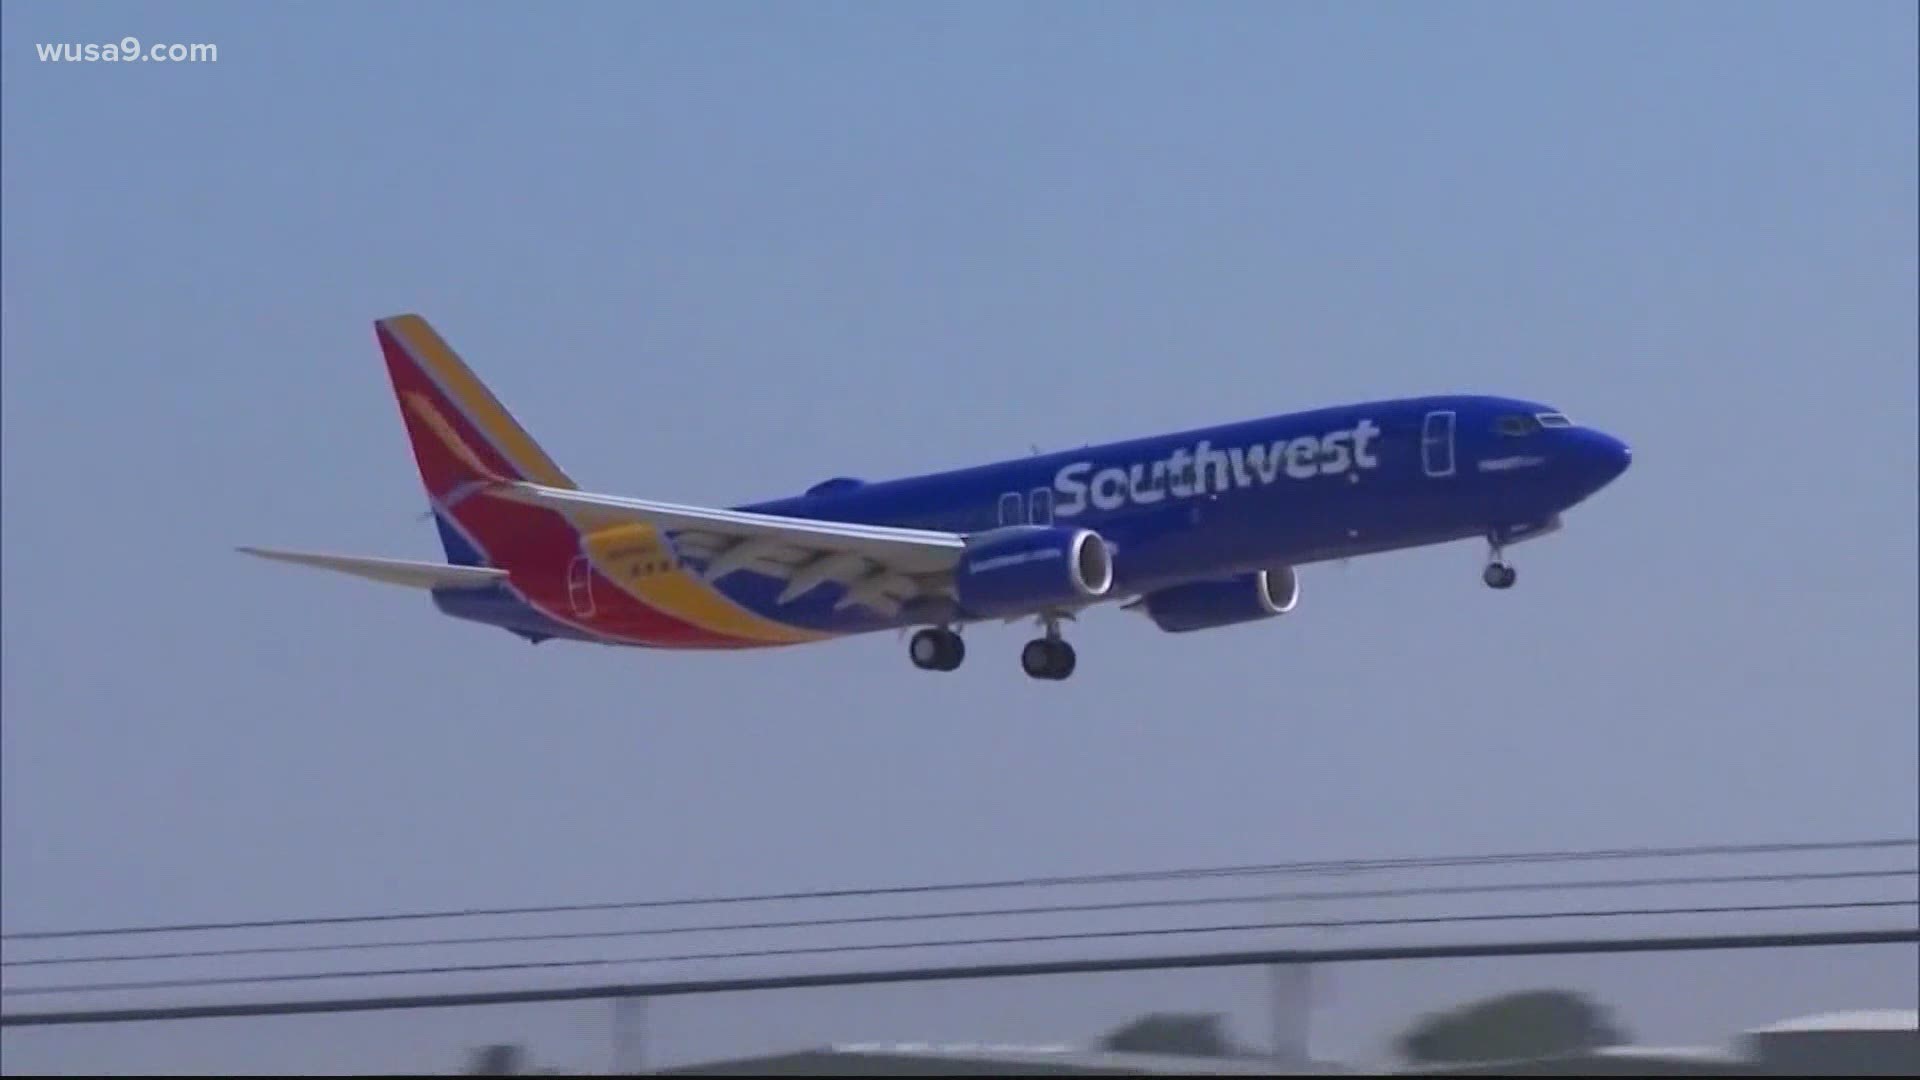 The FAA confirmed Southwest flights were temporarily grounded nationwide Tuesday while the airline worked to fix a 'reservation computer issue.'